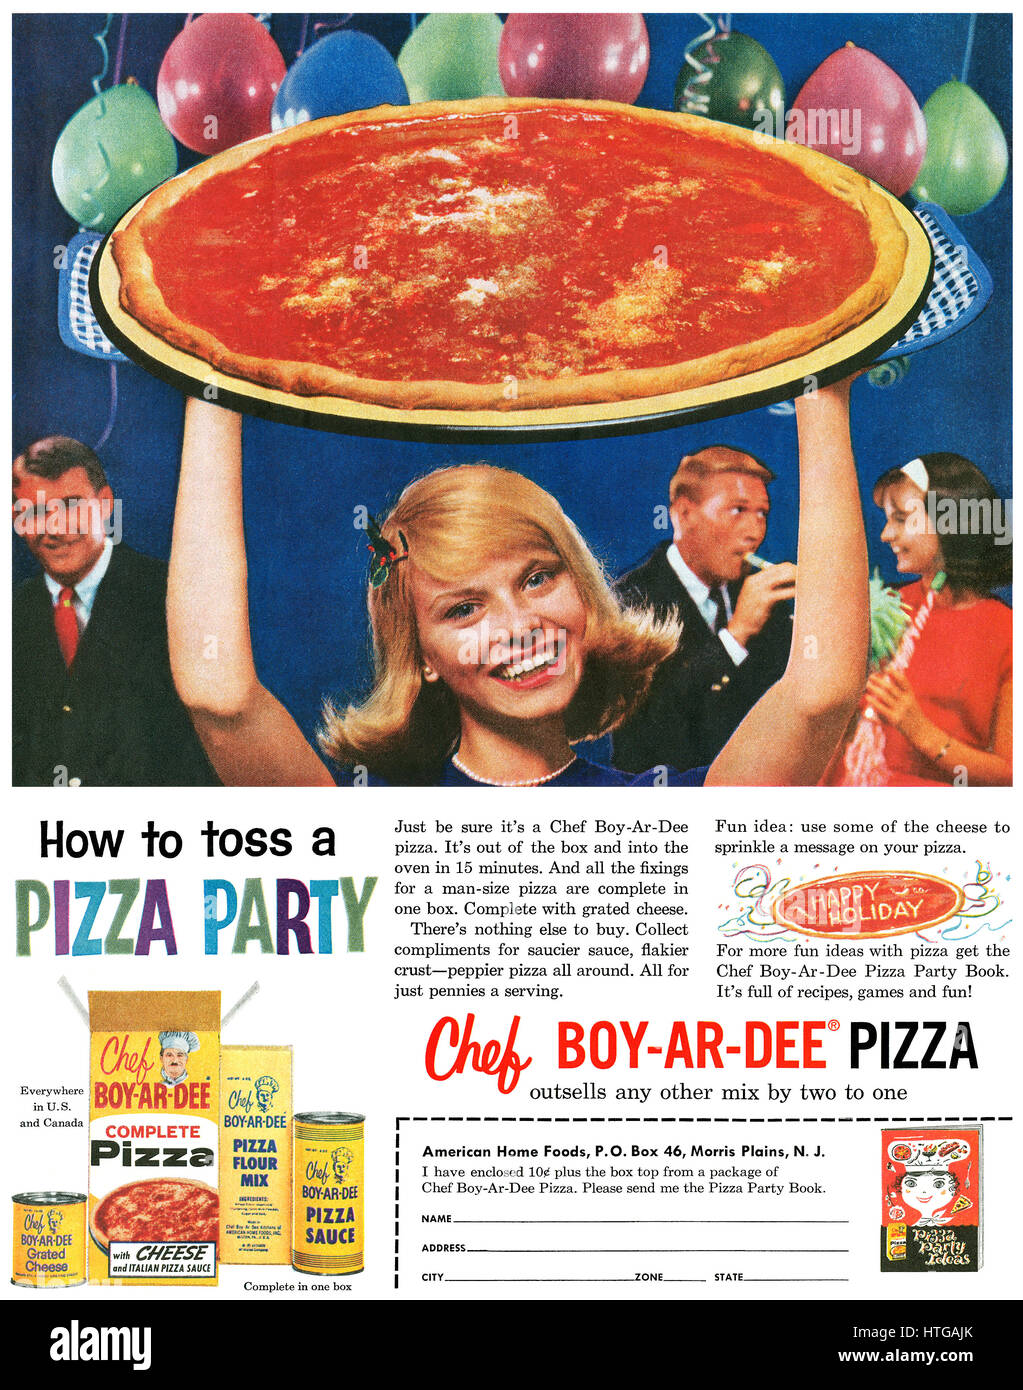 1960 U.S. advertisement for Chef Boy-Ar-Dee Pizza. Stock Photo